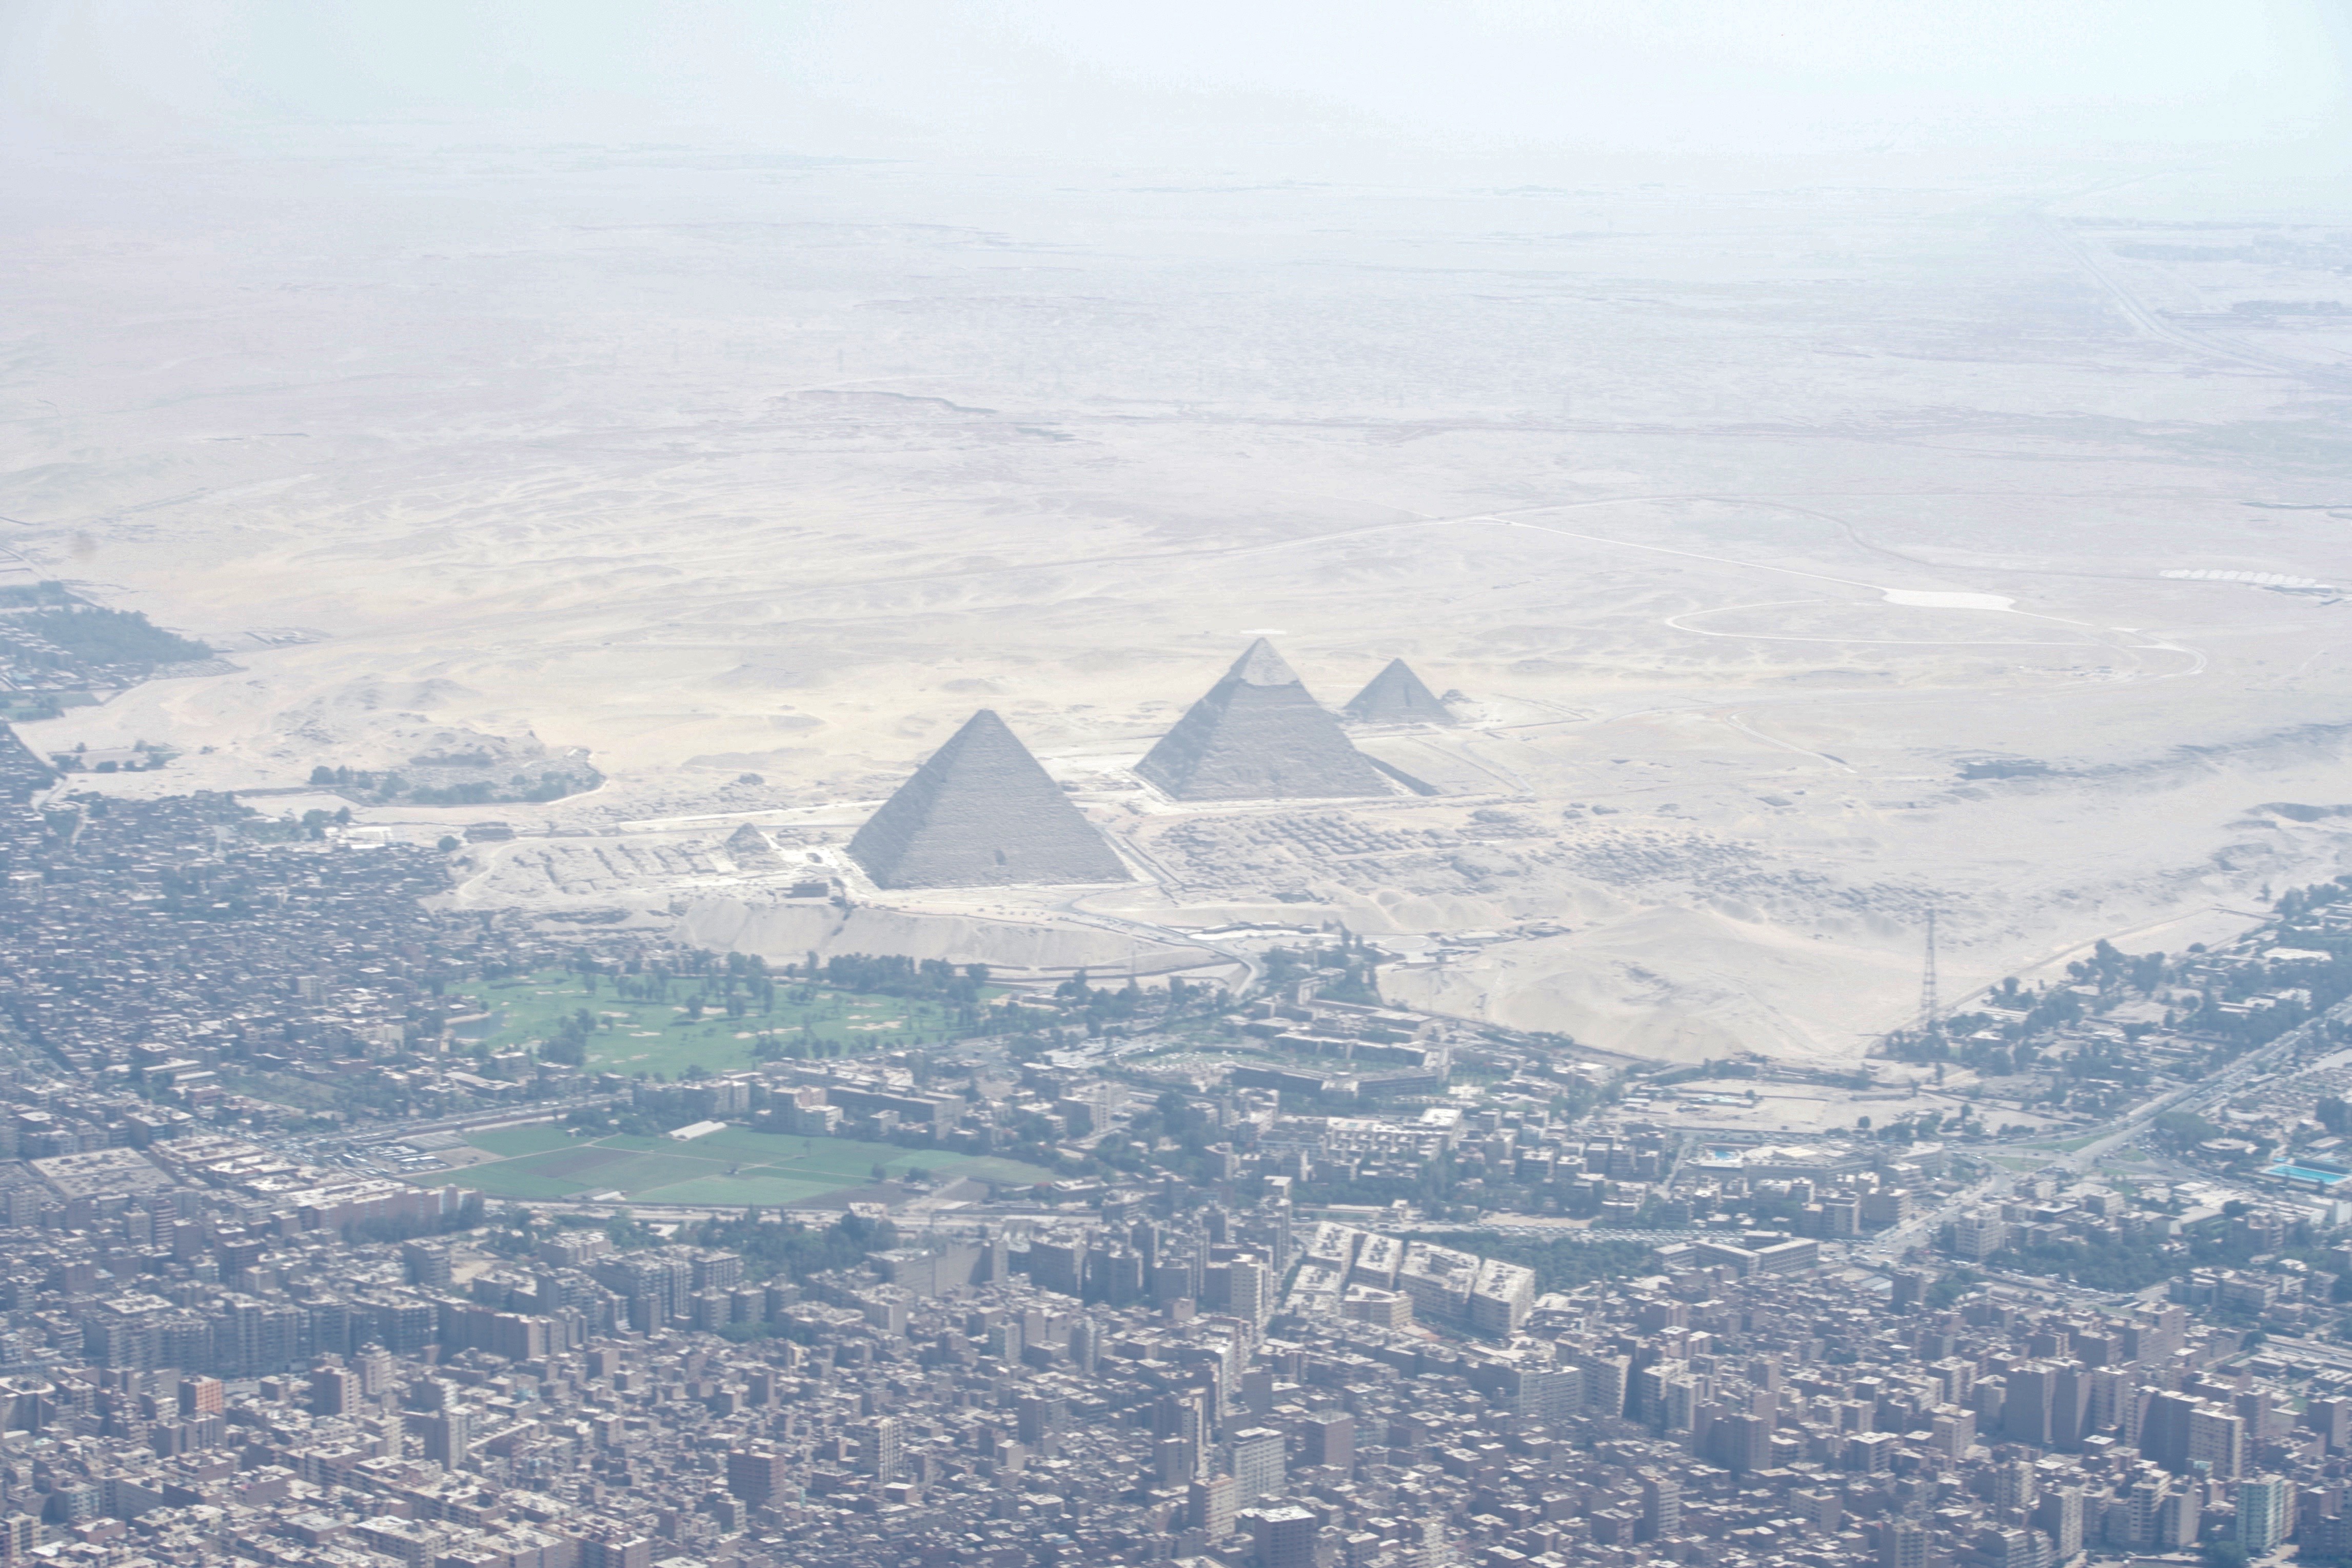 The_Great_Pyramid_of_Giza_as_Seen_From_Secretary_Kerry's_Plane_as_He_Travels_From_Vienna_to_Cairo_(26824771360).jpg